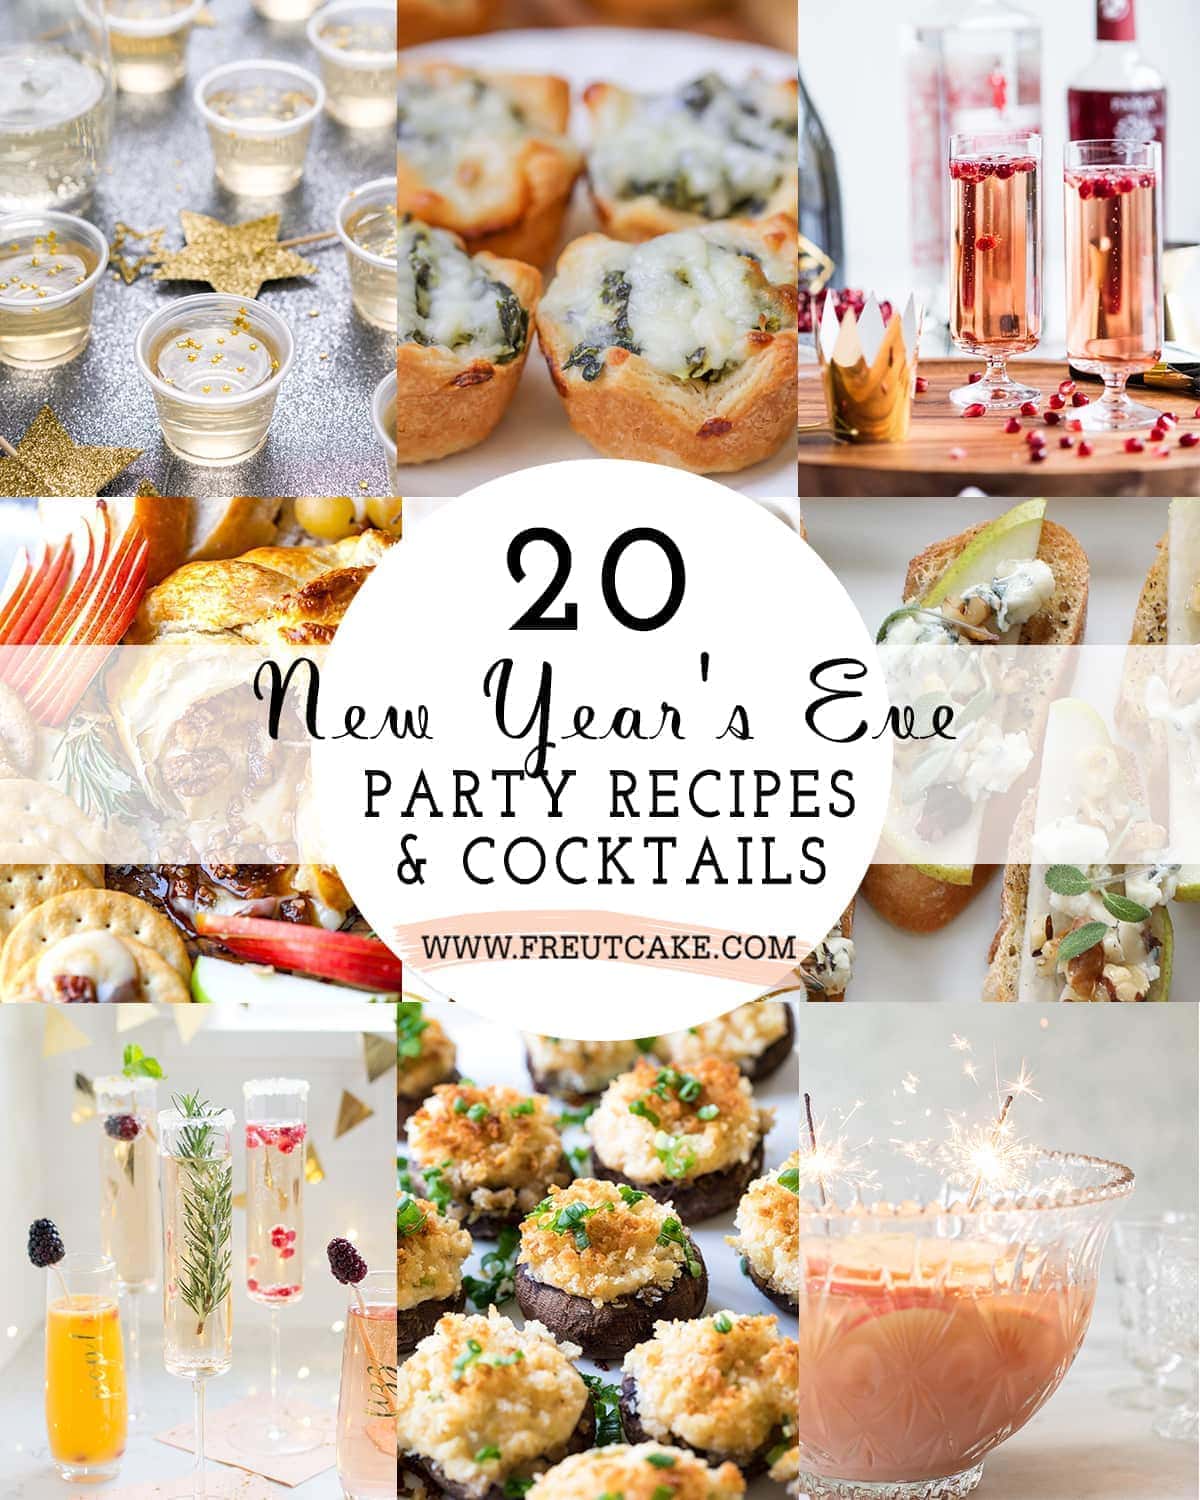 20 NEW YEAR'S EVE PARTY RECIPES AND COCKTAILS